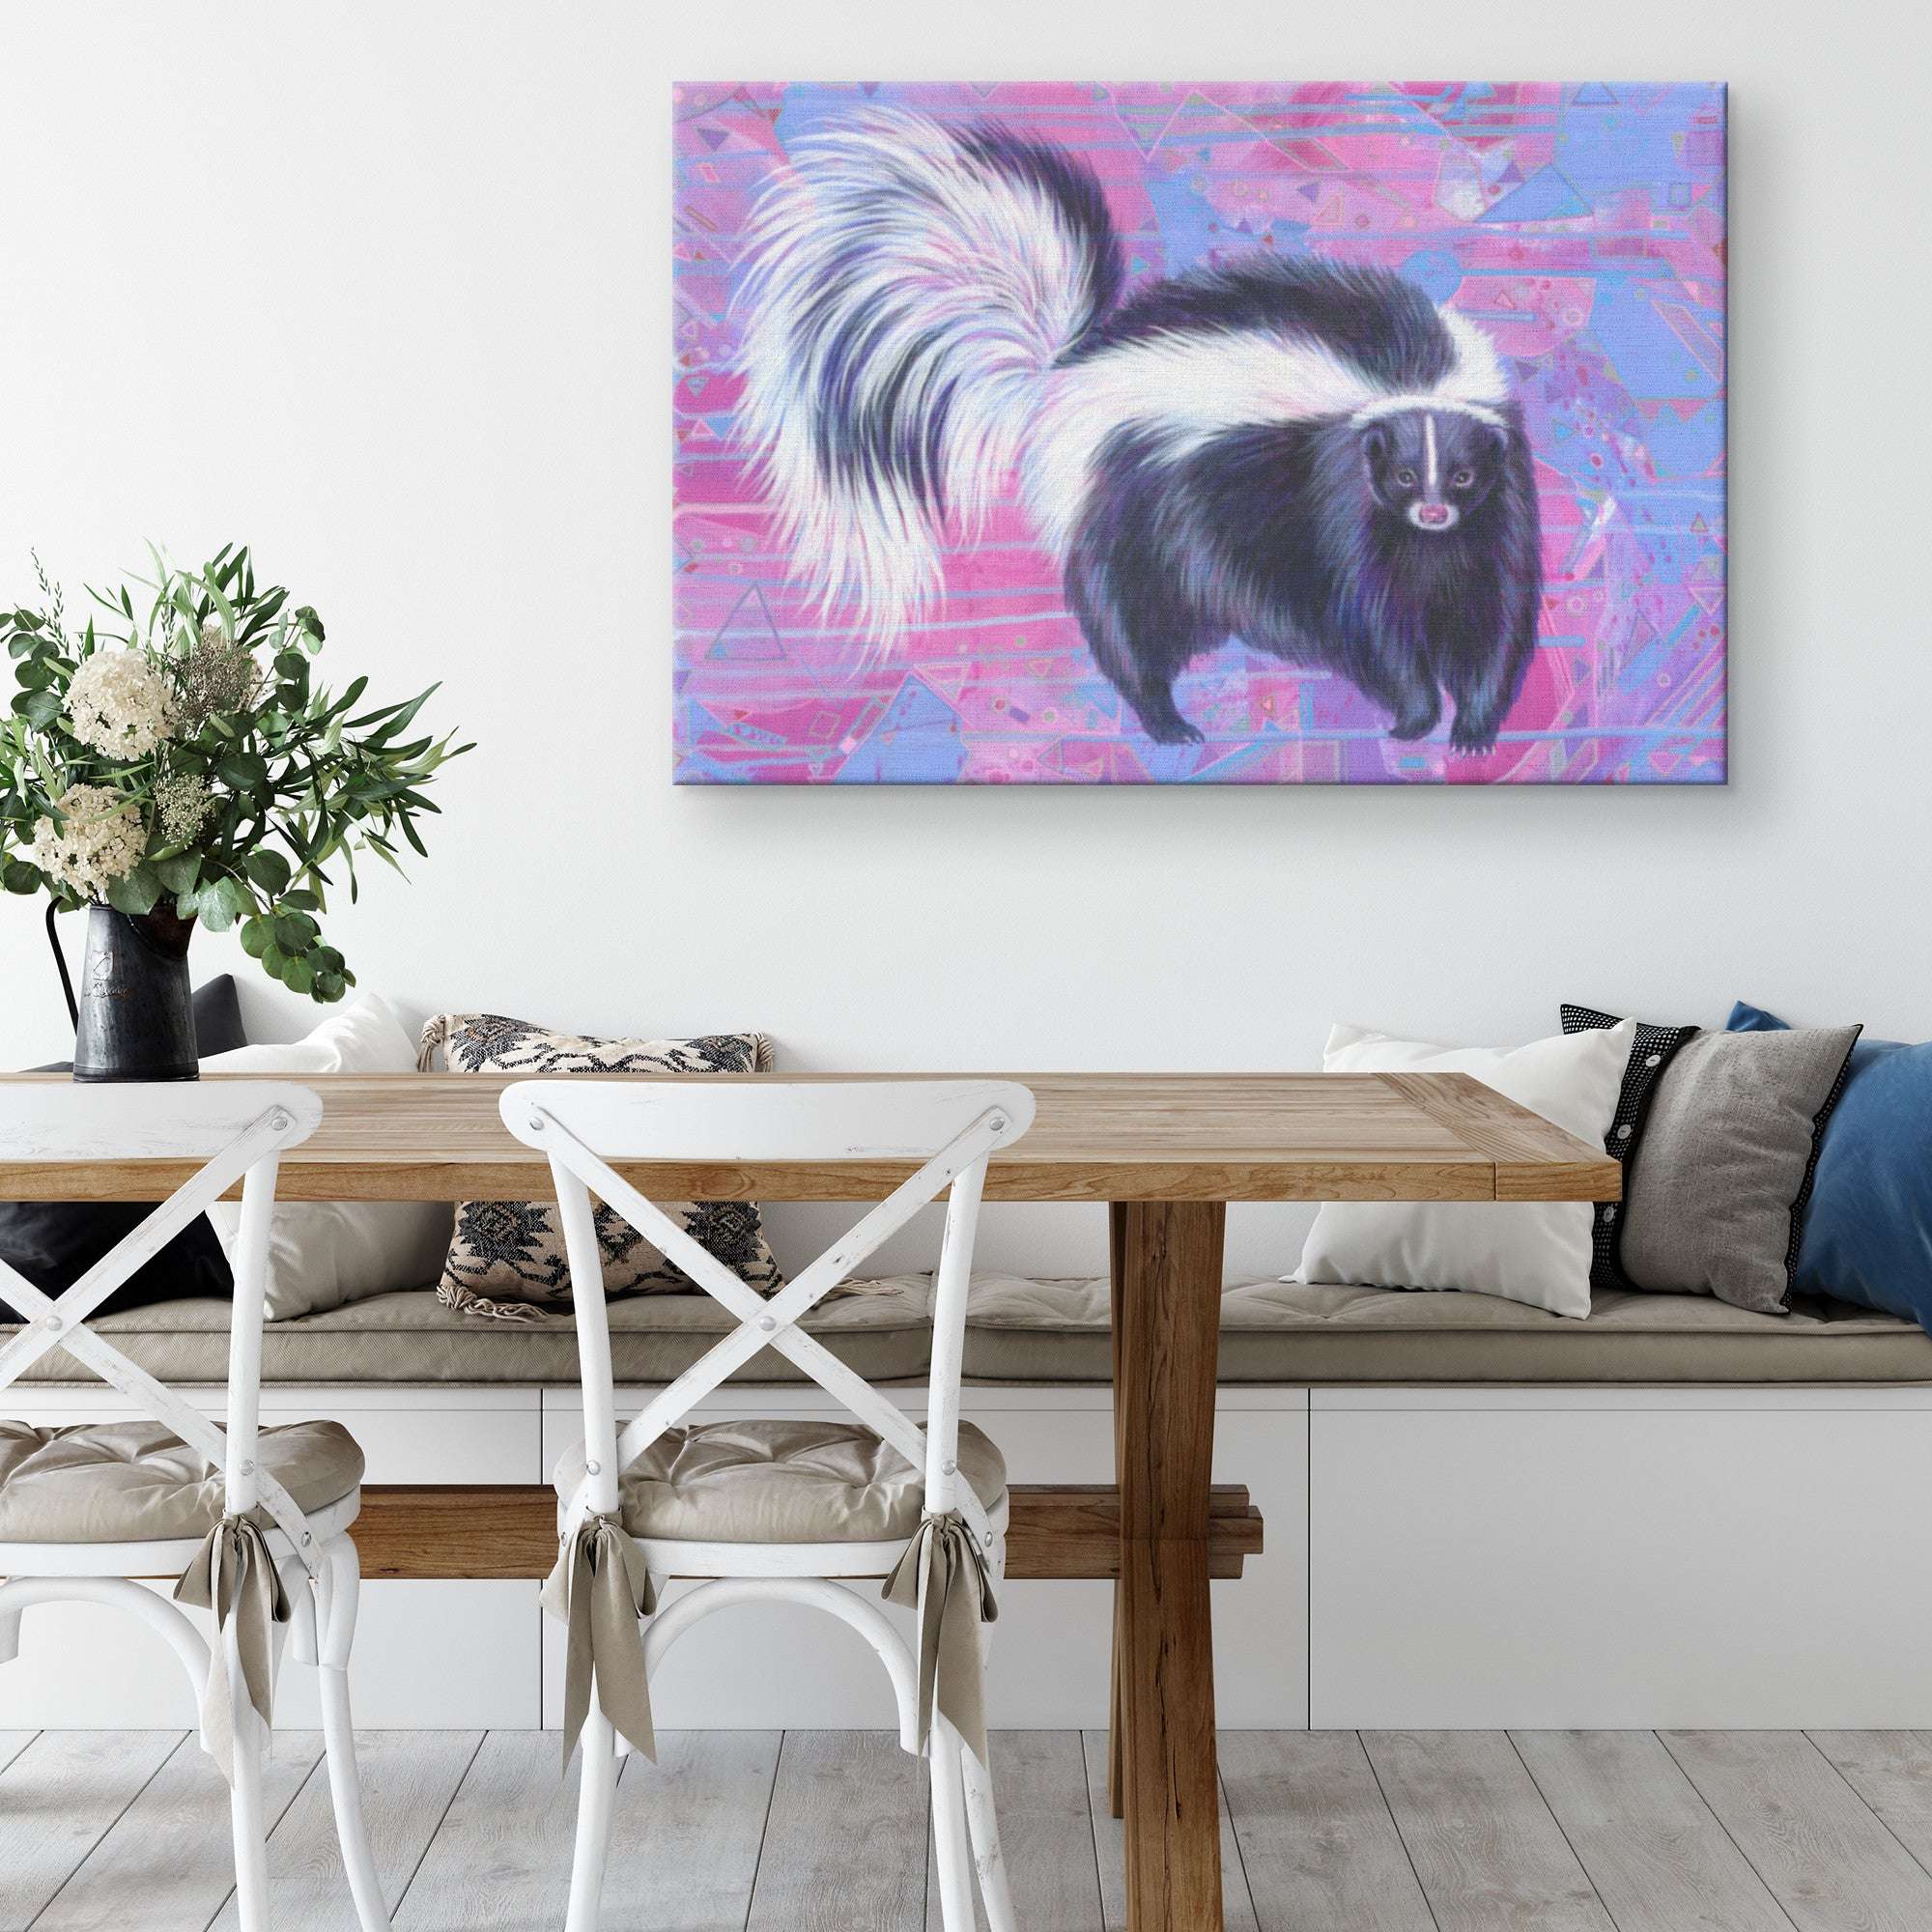 Colorful Canvas Skunk Art Print hanging in a bright living room with white chairs and wooden table.